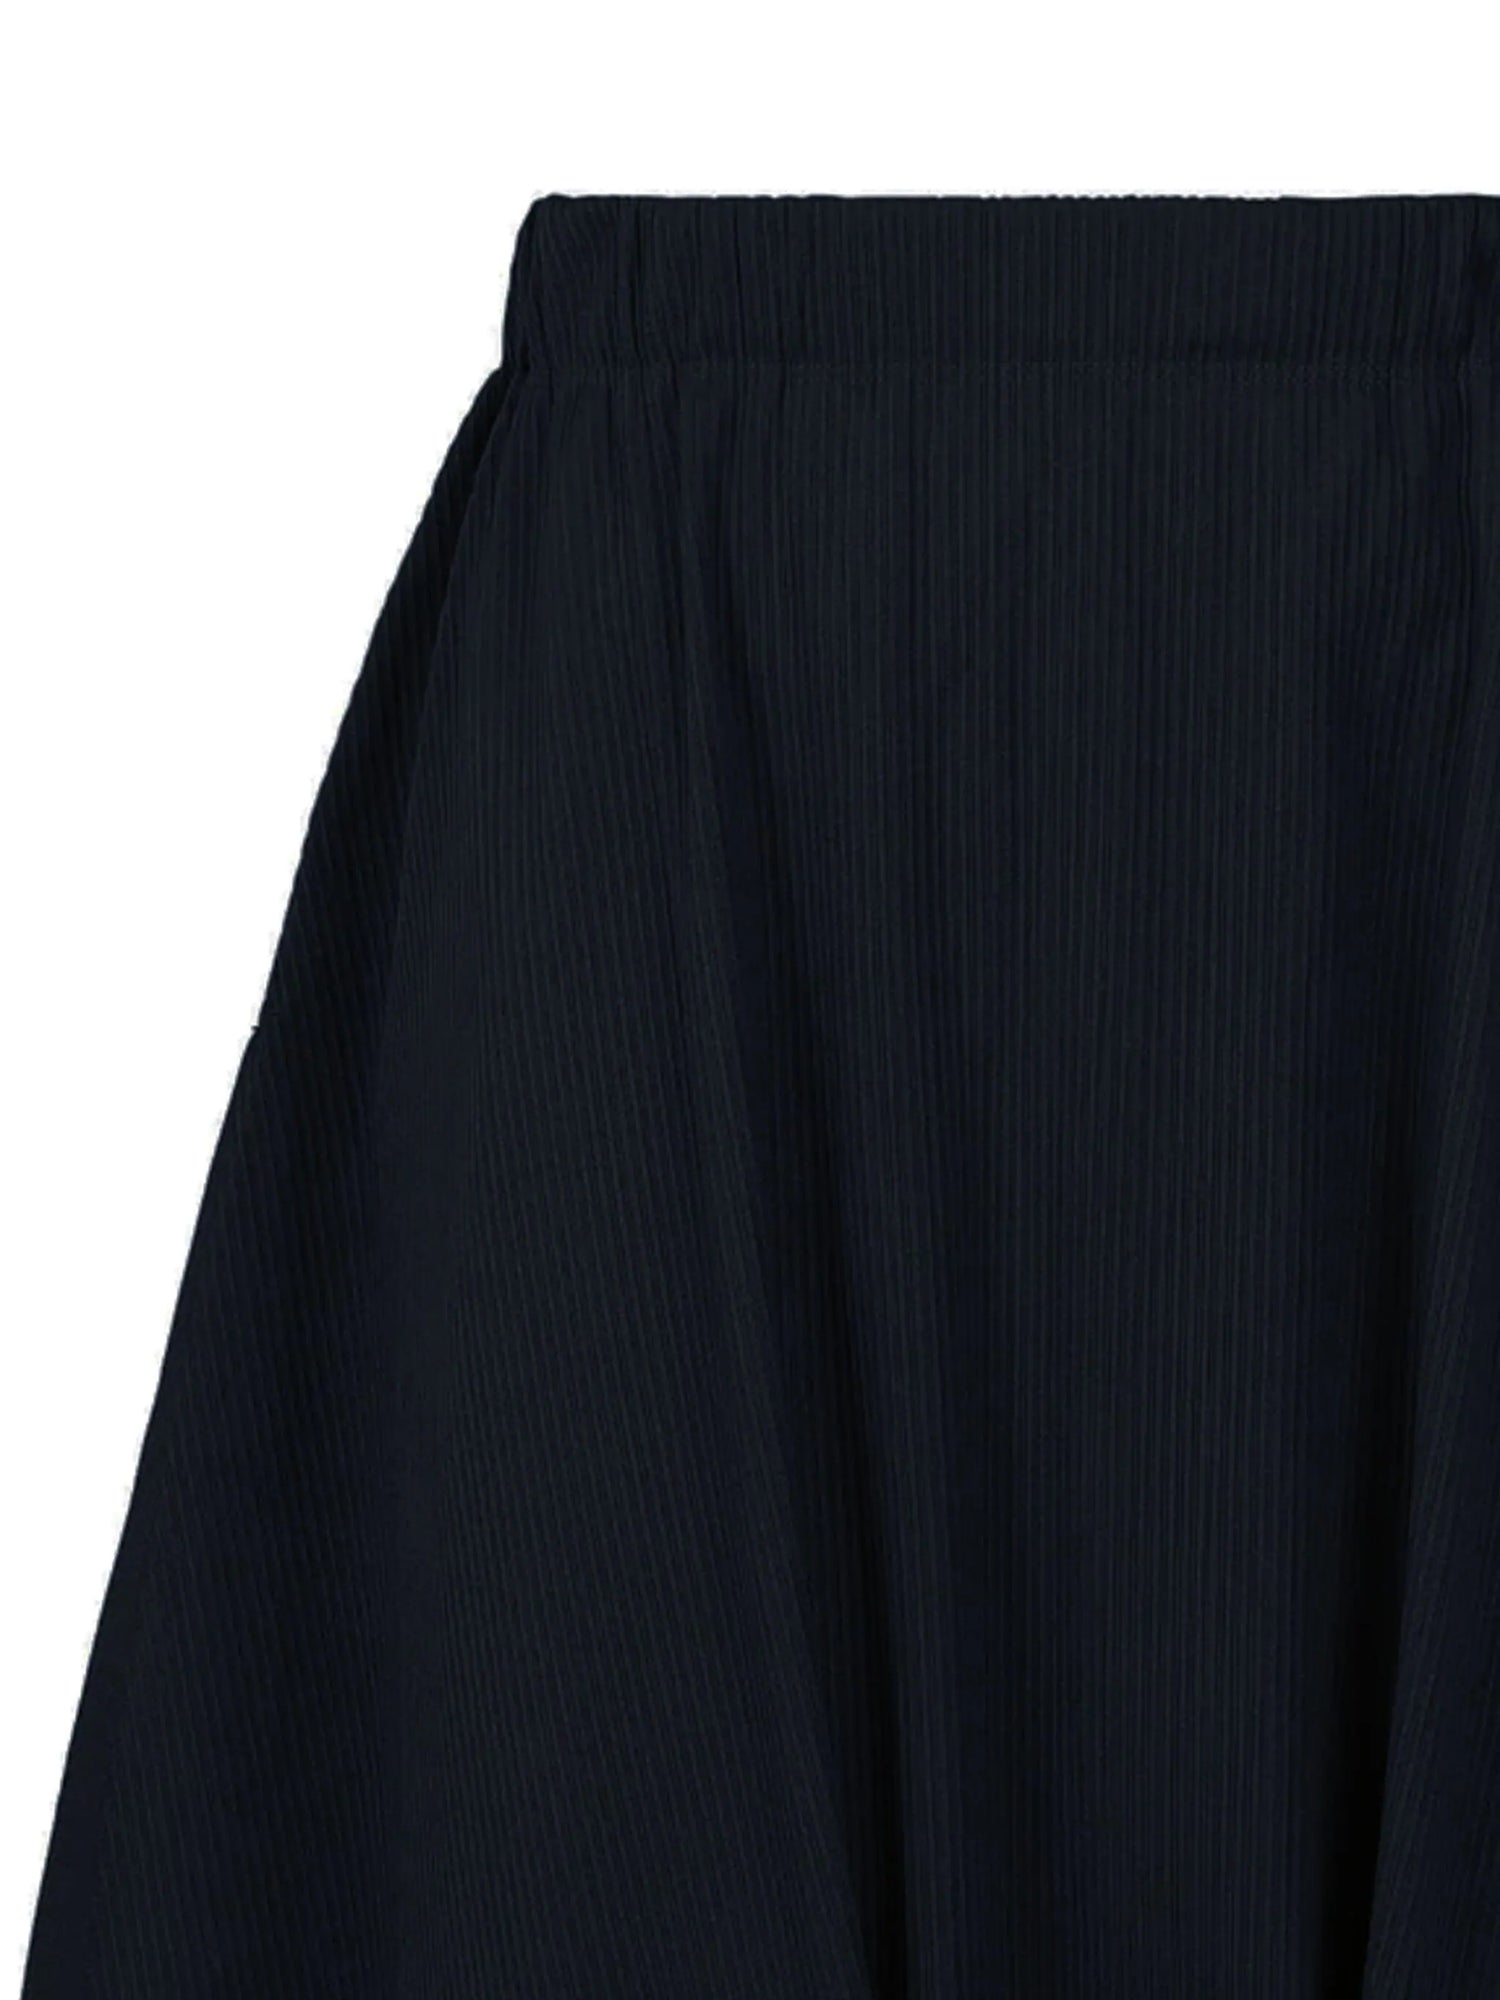 Knitted pleated trousers, black